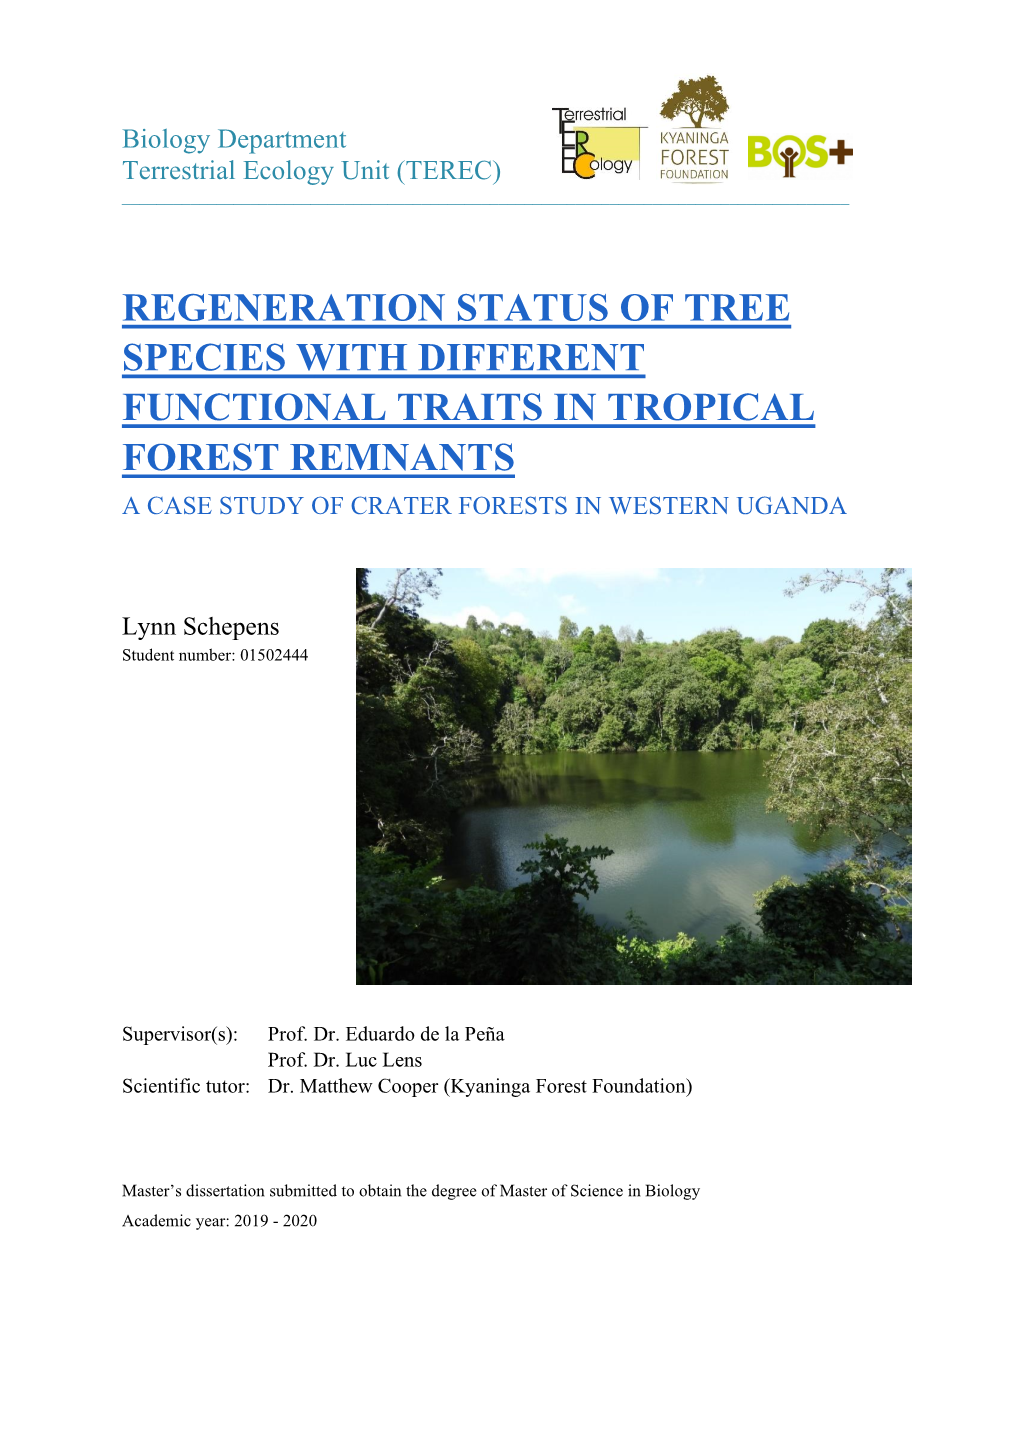 Regeneration Status of Tree Species with Different Functional Traits in Tropical Forest Remnants a Case Study of Crater Forests in Western Uganda